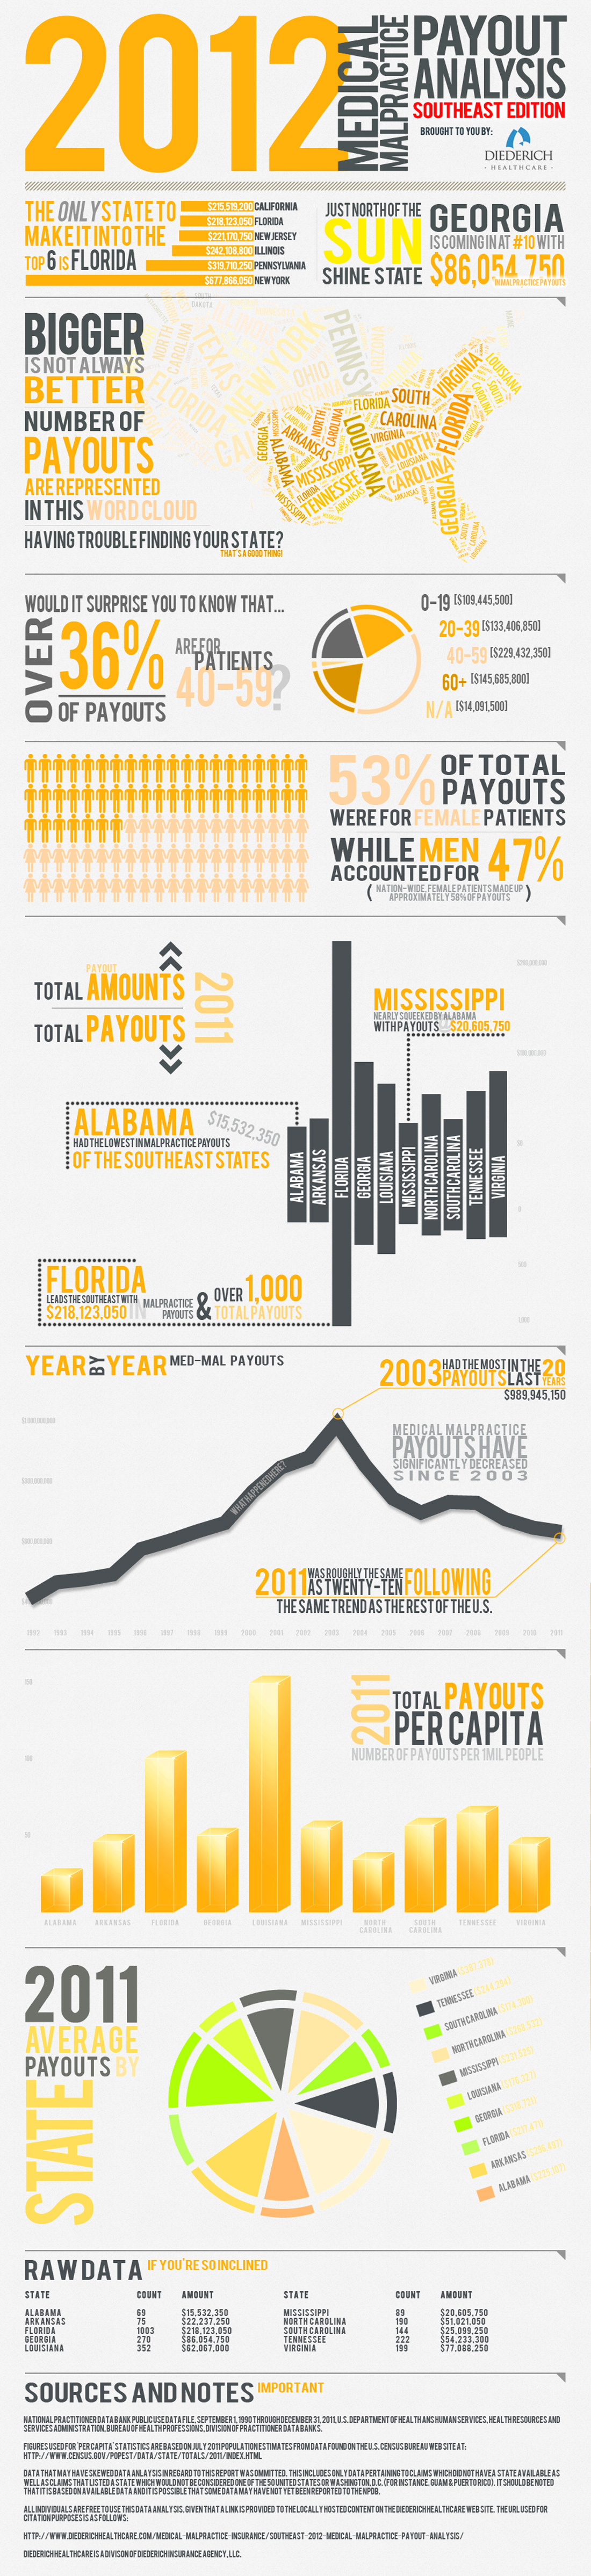 2012-southeast-medical-malpractice-payout-analysis